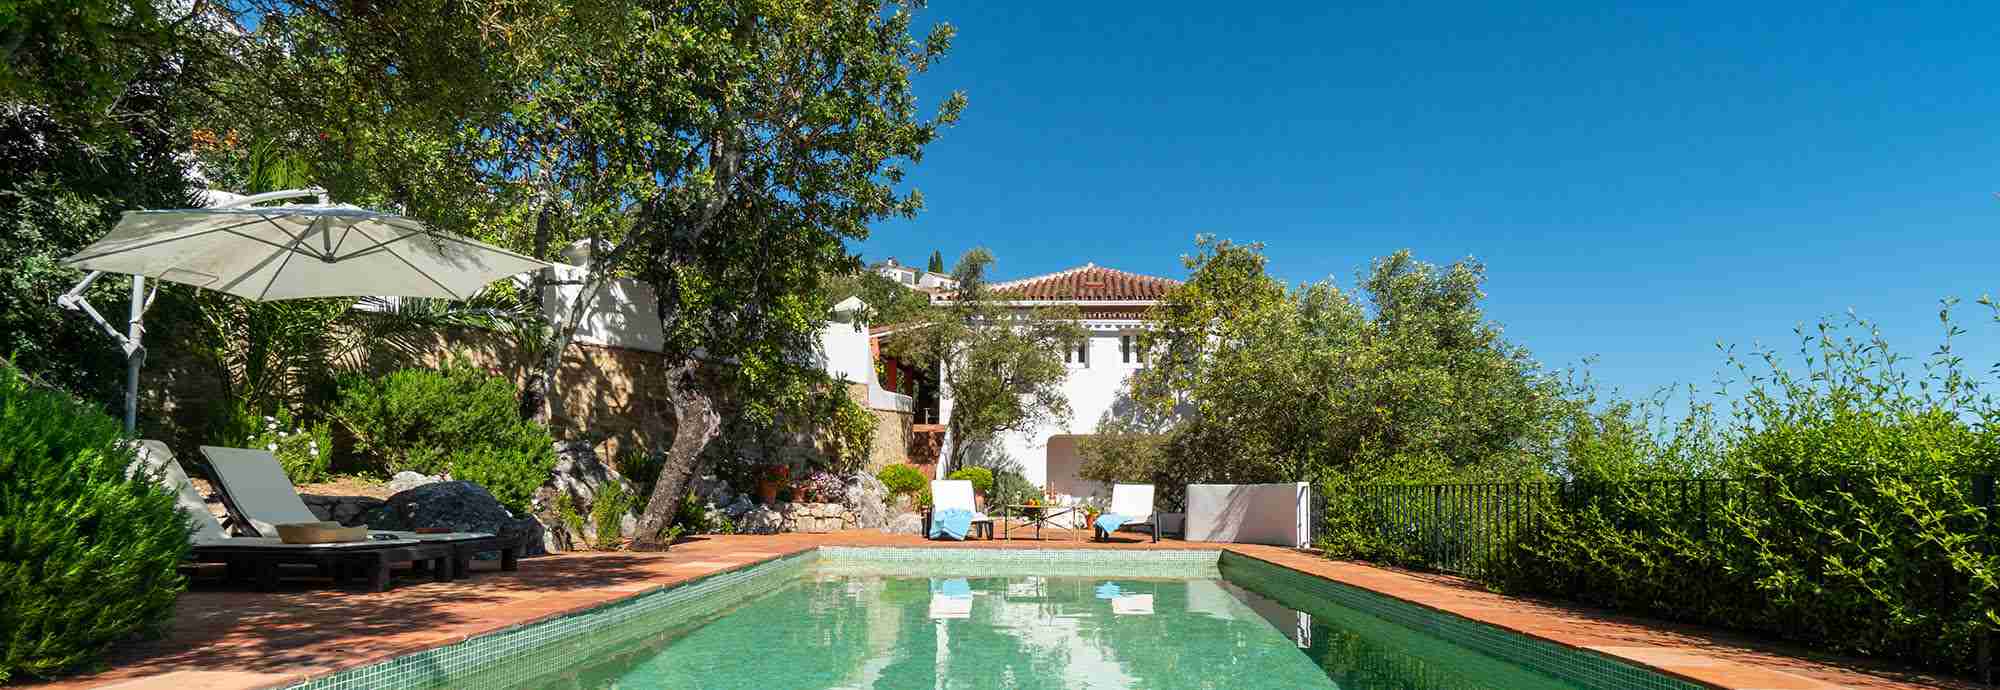 Gaucin holiday villa with private pool, Ronda mountains, Andalucia